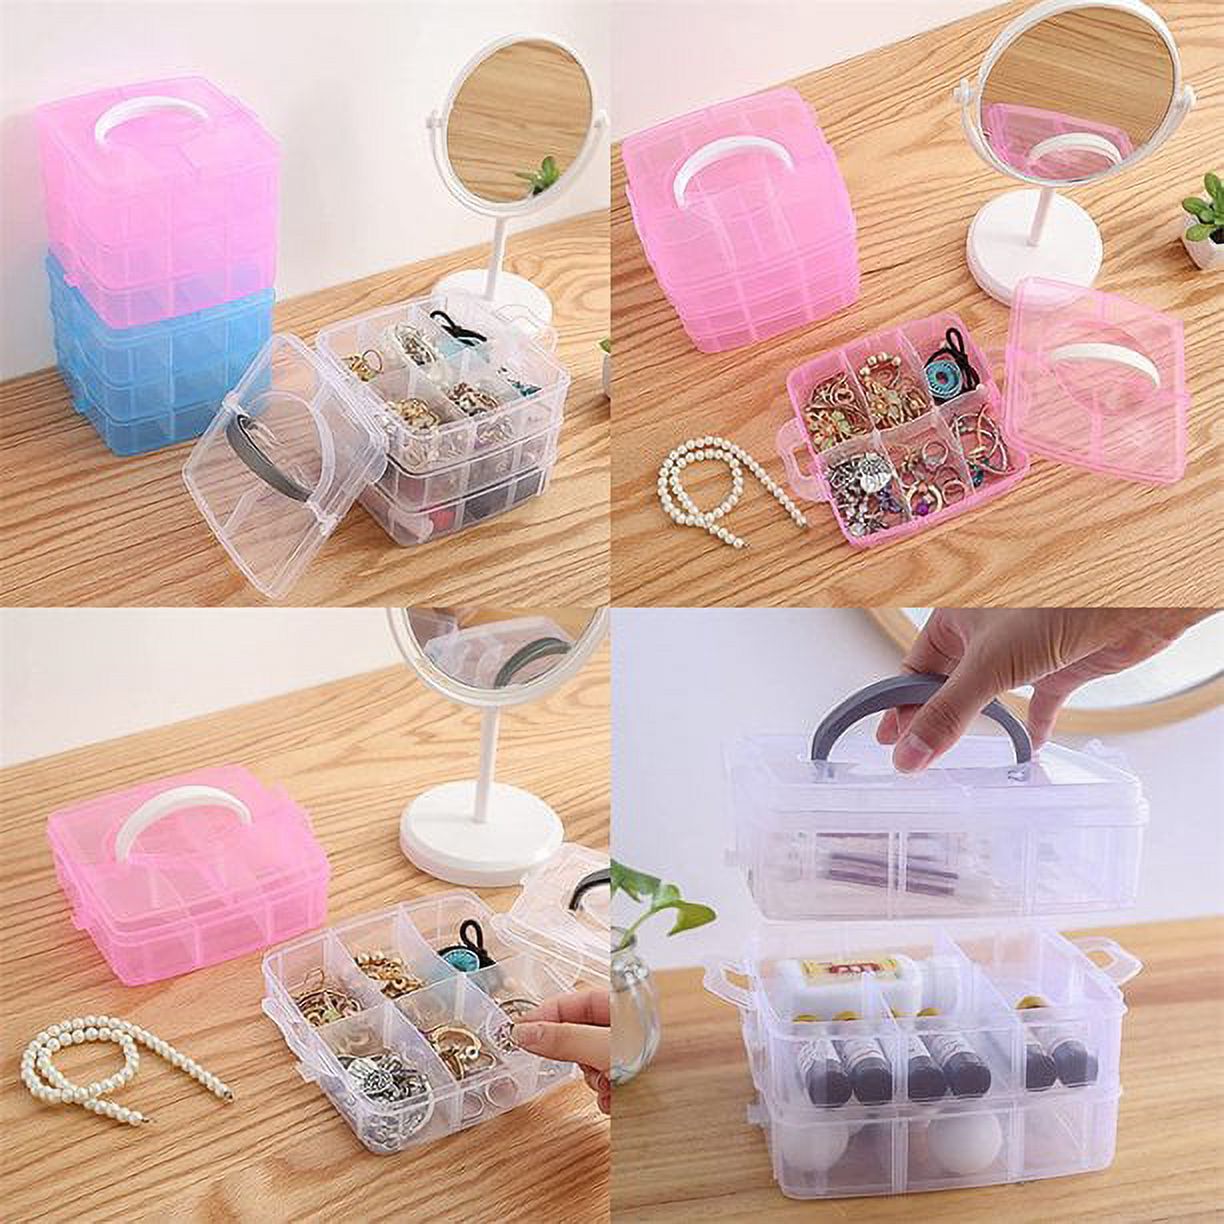 Topboutique Stackable Storage Container with 18 Adjustable Compartments - Clear - Sewing Box & Craft Storage / Bead Organizer Box / Art and Crafting